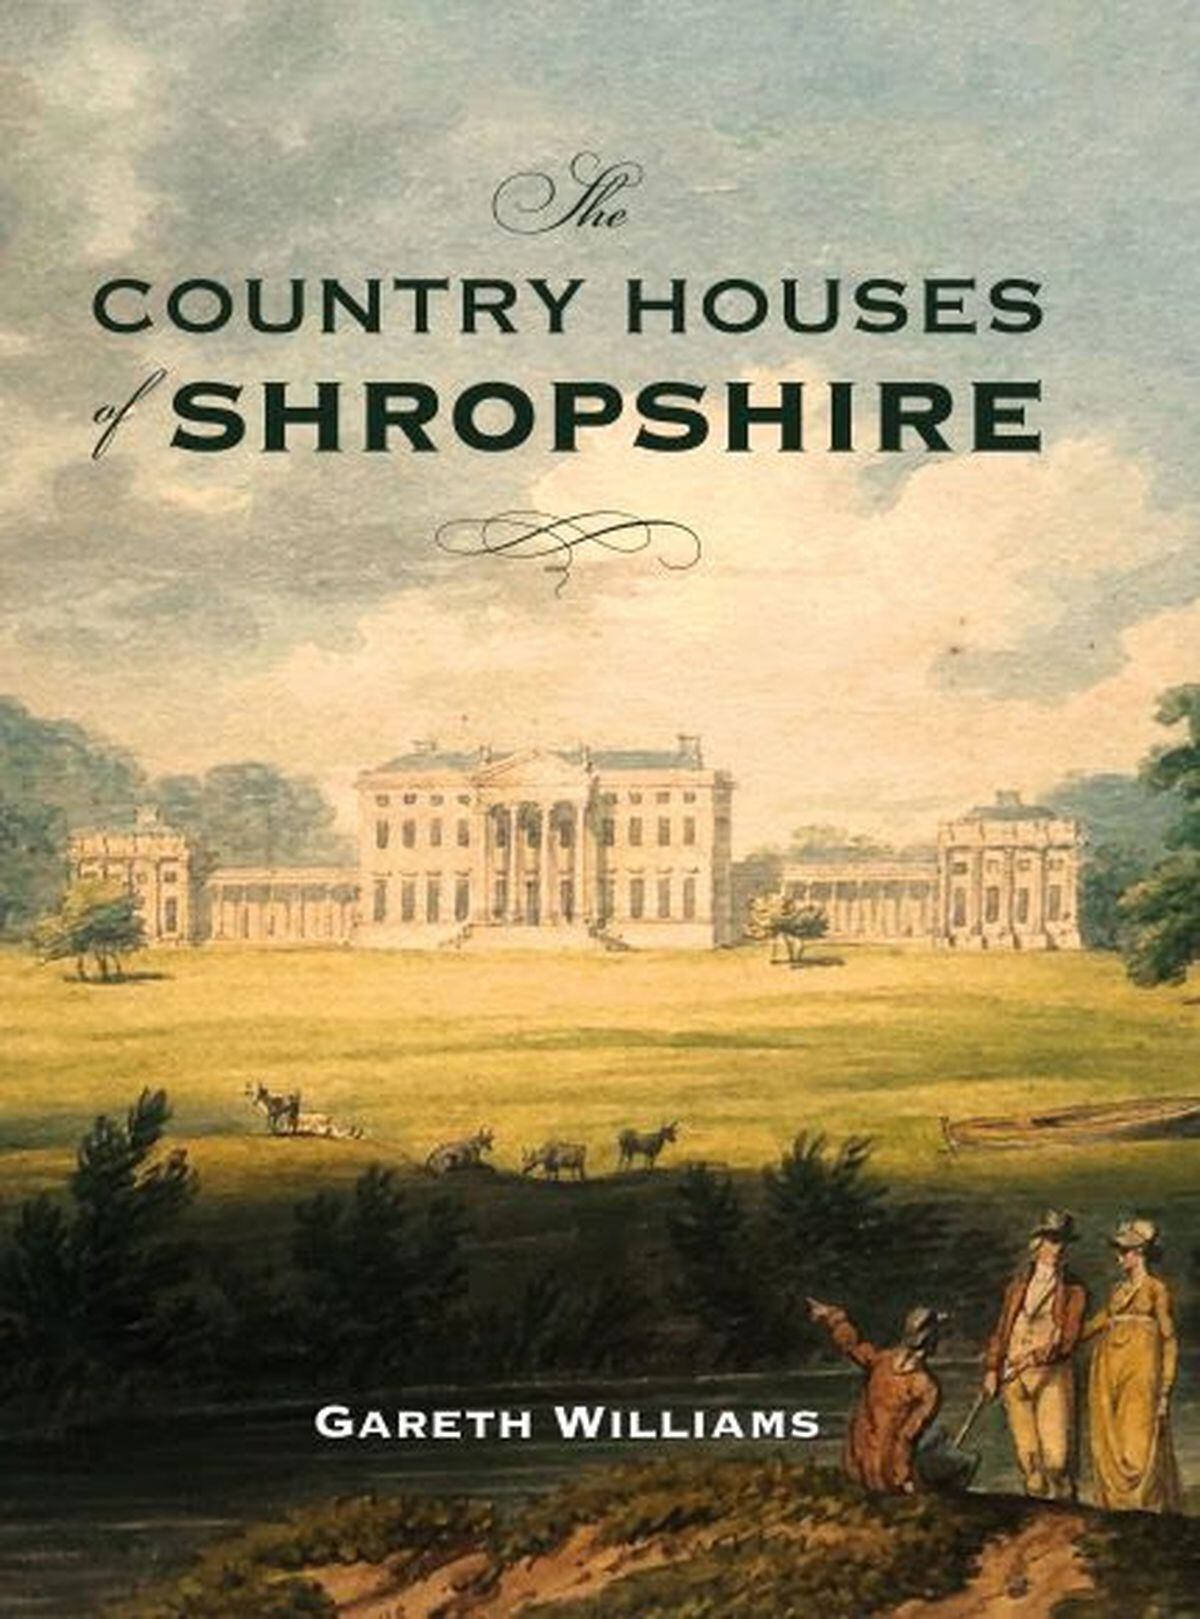 The Country Houses of Shropshire by Gareth Williams. 